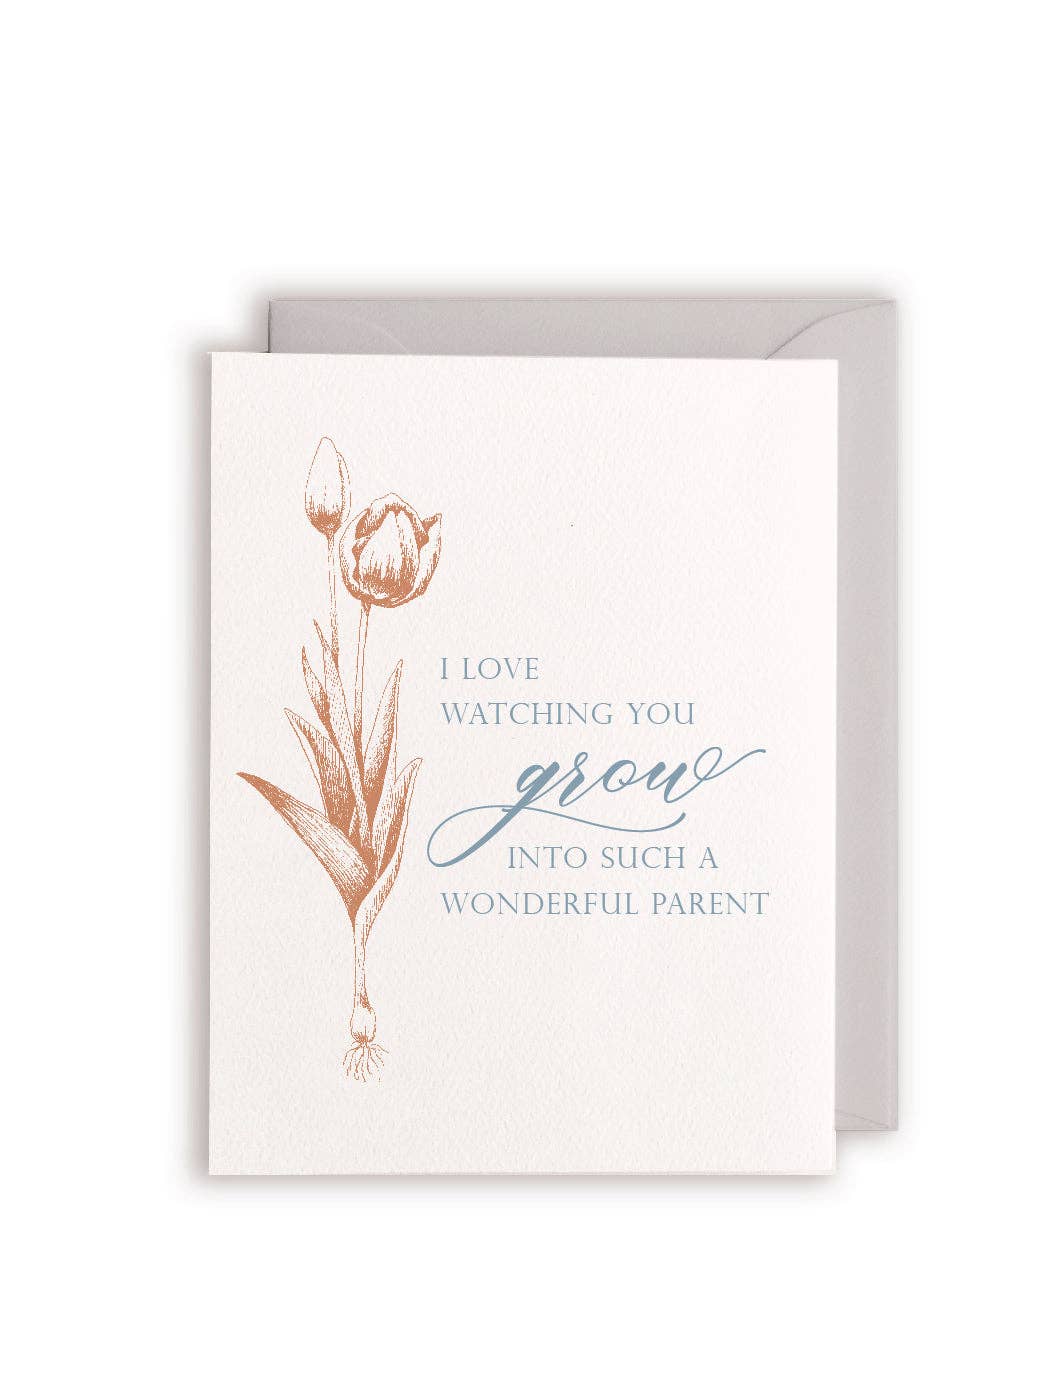 I Love Watching You Grow Into Such a Wonderful Parent Letterpress Greeting Card - Rust Belt Love Paperie